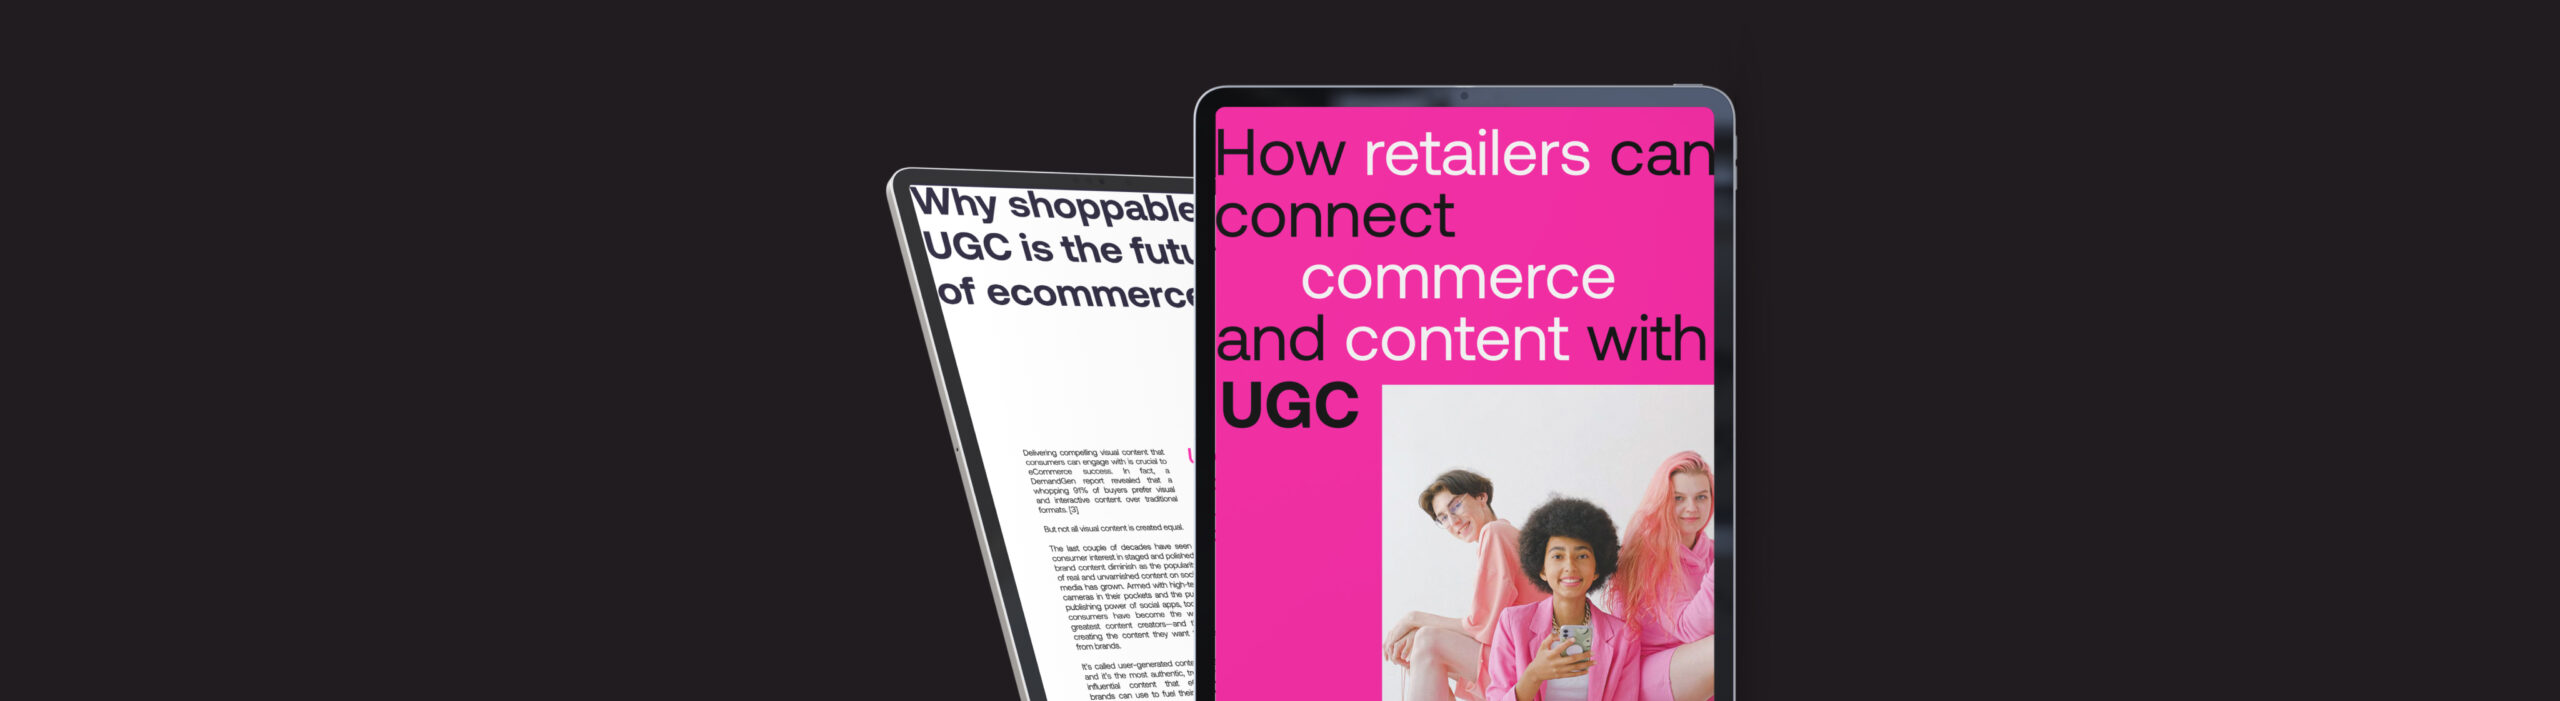 How retailers can connect commerce and content with UGC